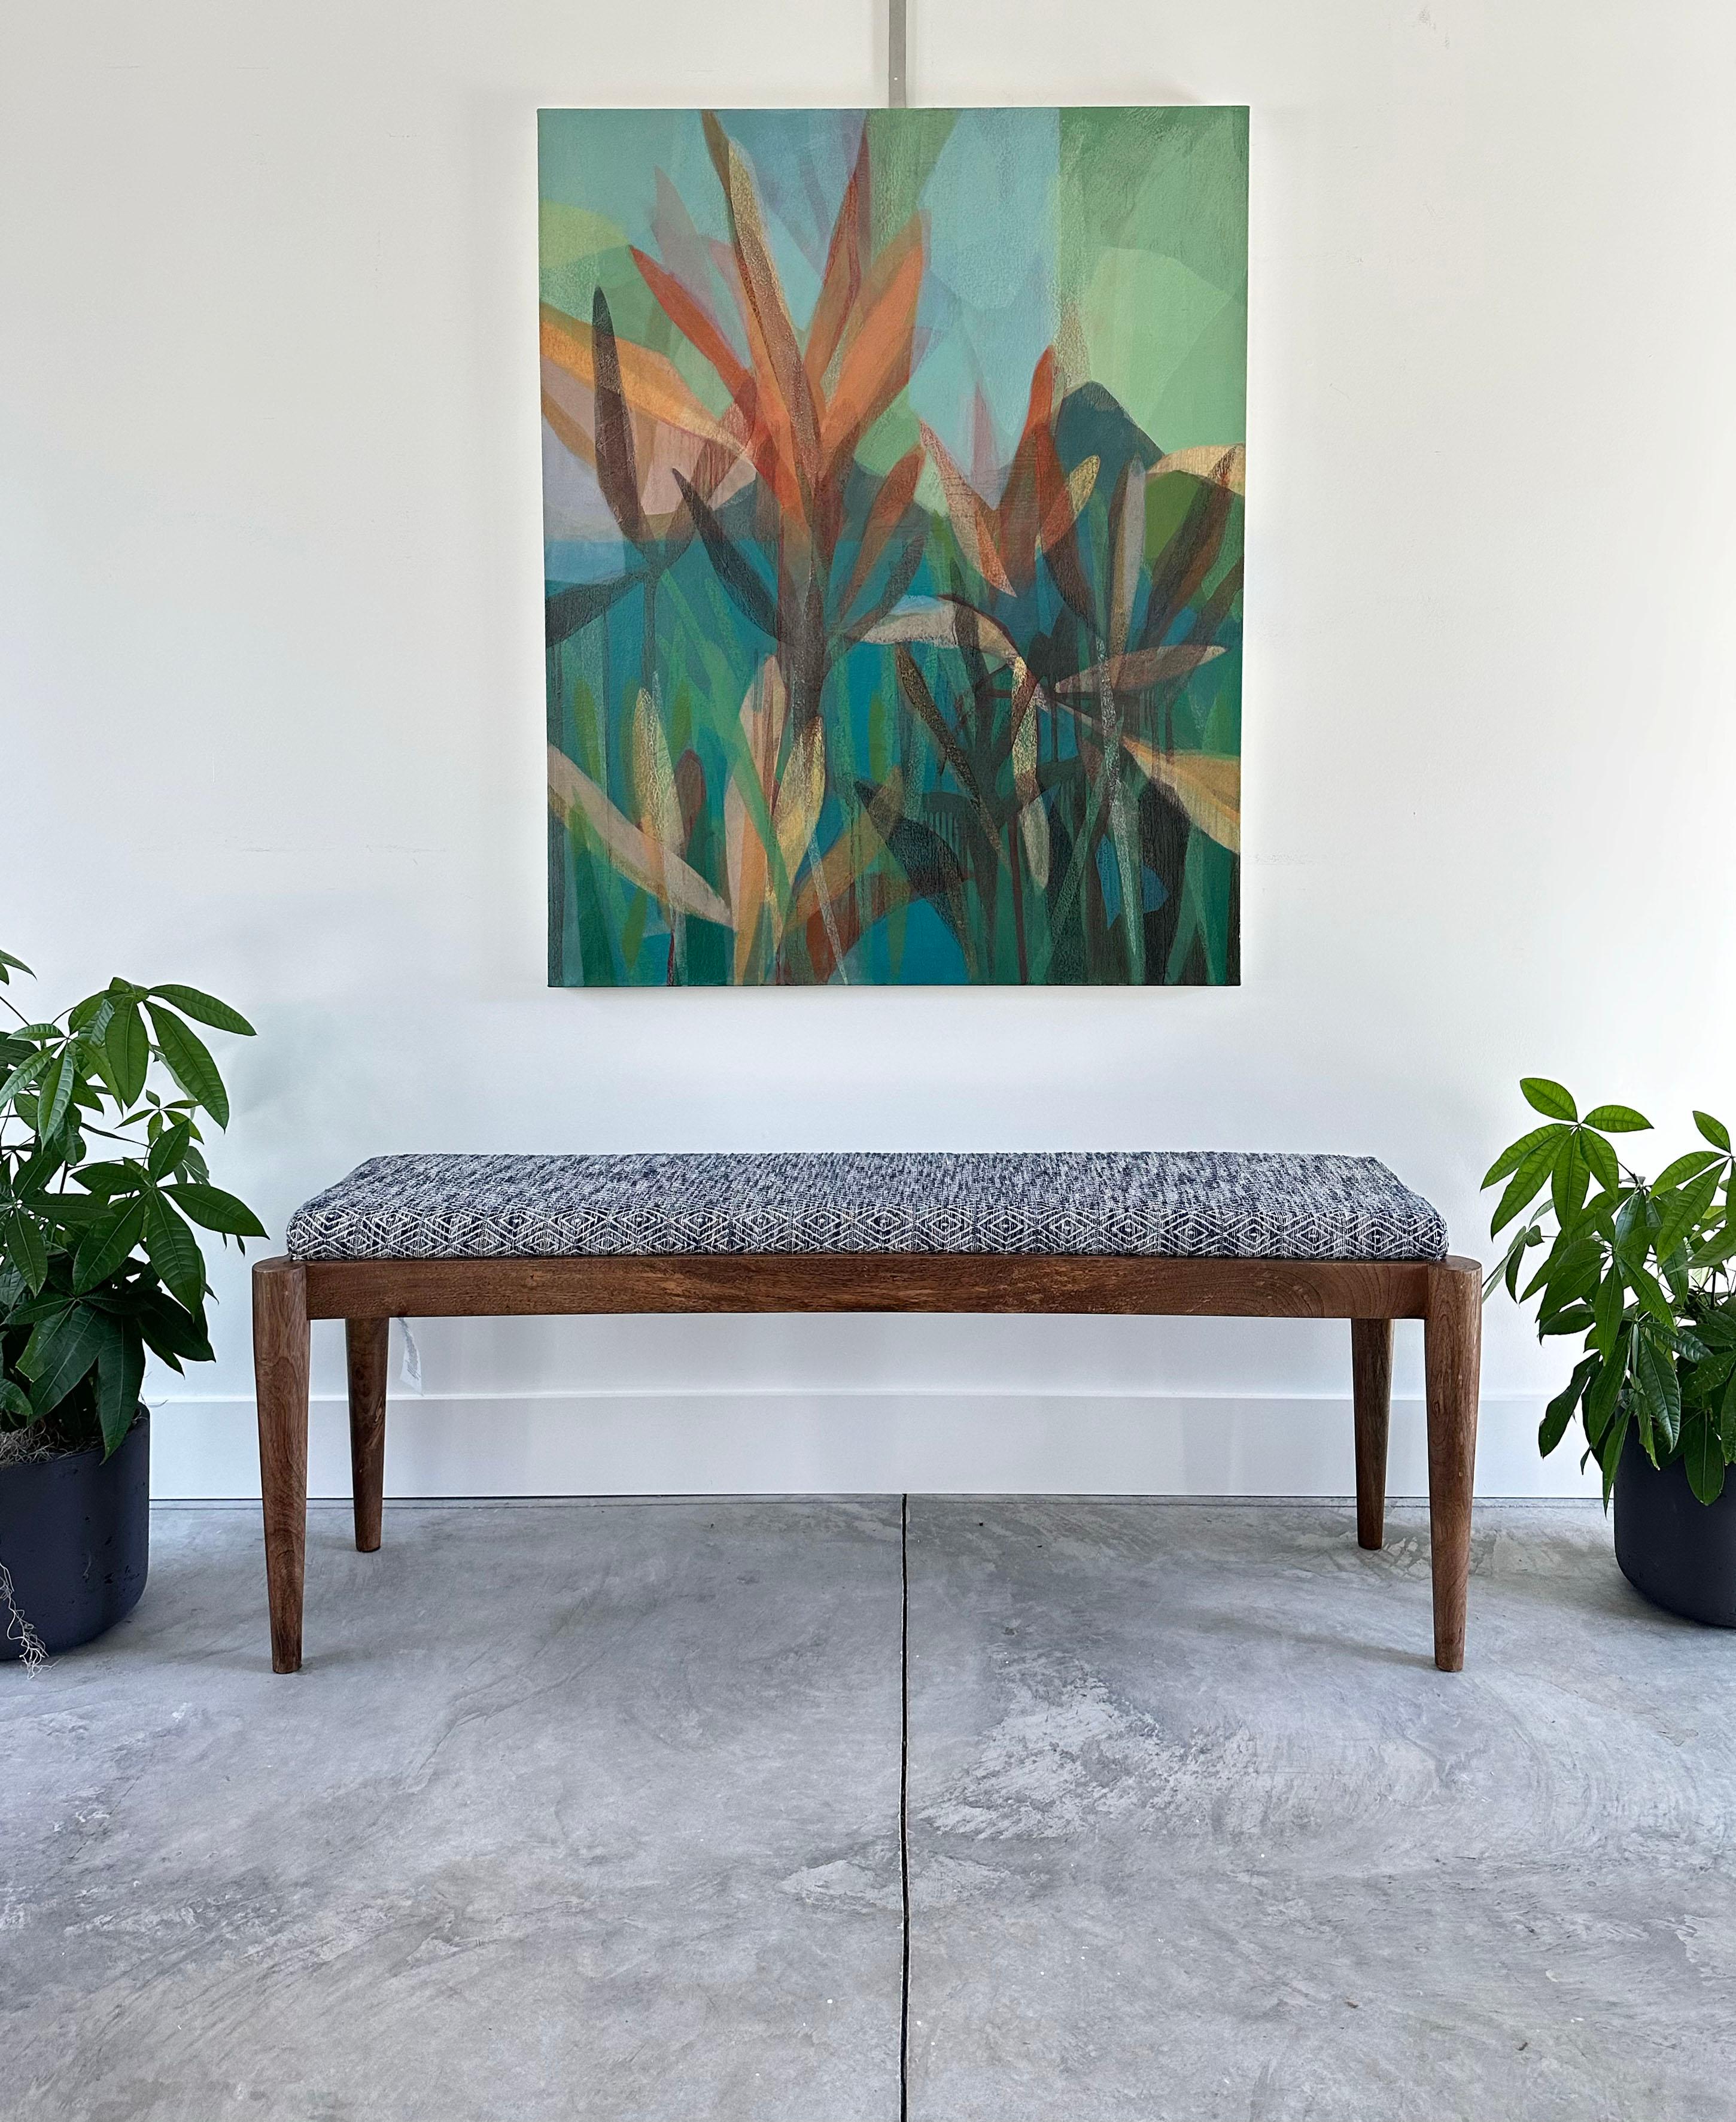 This painting is an abstract landscape on canvas featuring vibrant and dark layers of green, yellow, orange and blue.

Katherine Sandoz is inspired by the work of Helen Frankenthaler, Richard Diebenkorn, Morris Louis, Vincent Van Gogh, Willem de